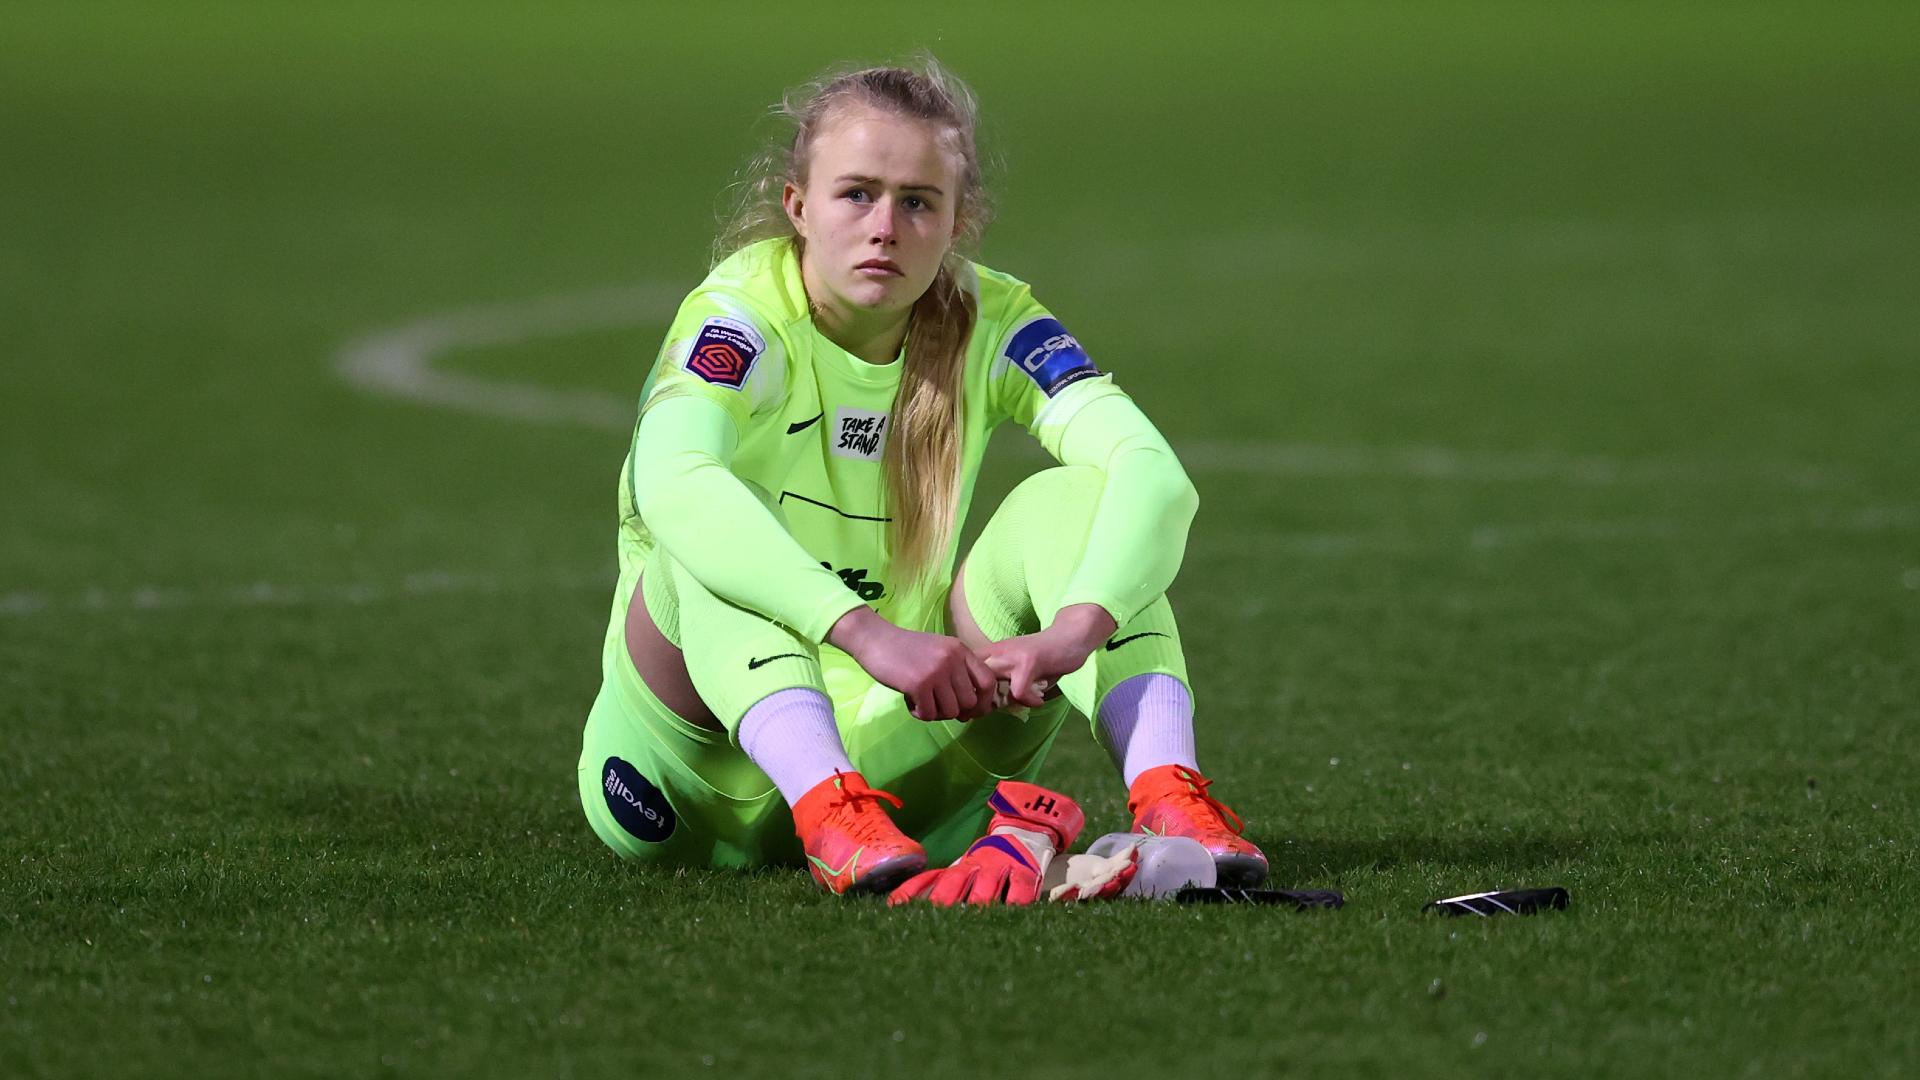 'The girls are going to warm up and she's in tears' - FA blasted for making Team GB cuts just before Birmingham-Everton clash